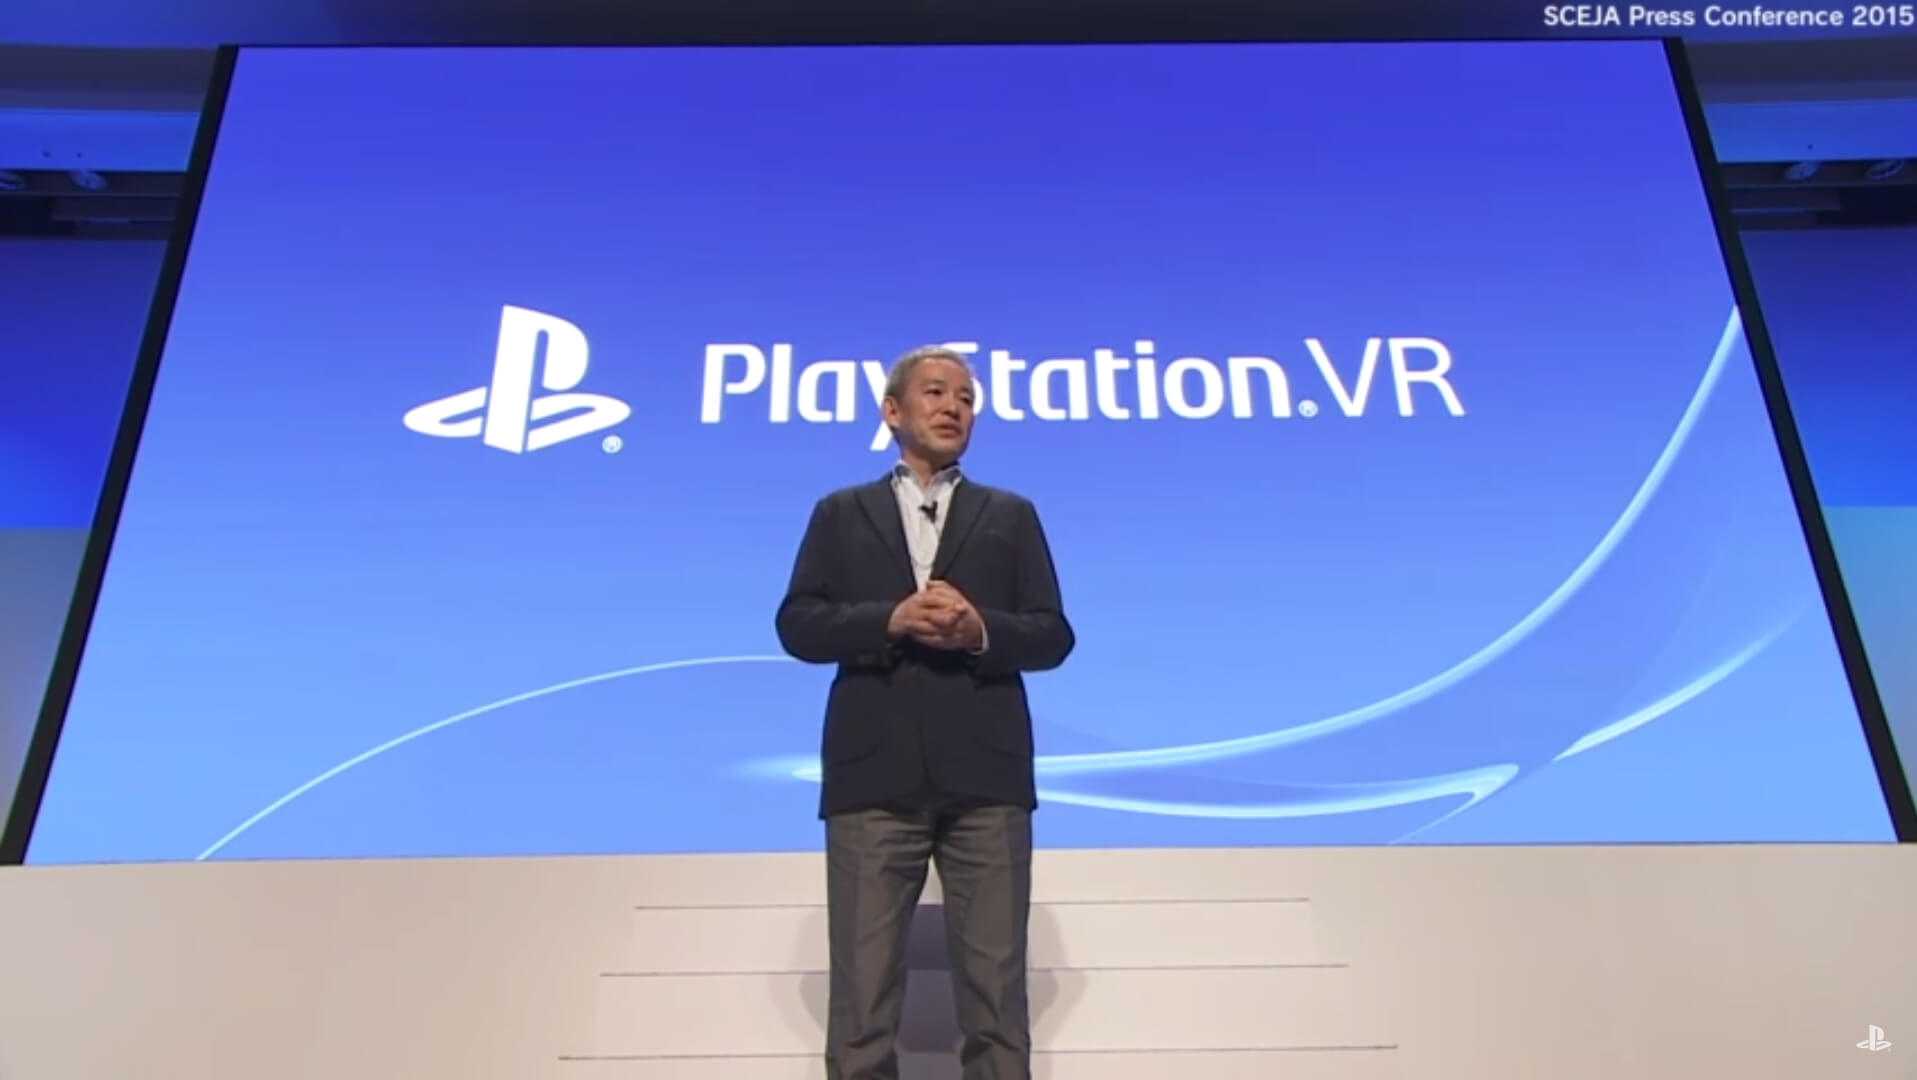 PlayStation VR Price is only $399 release October 2016